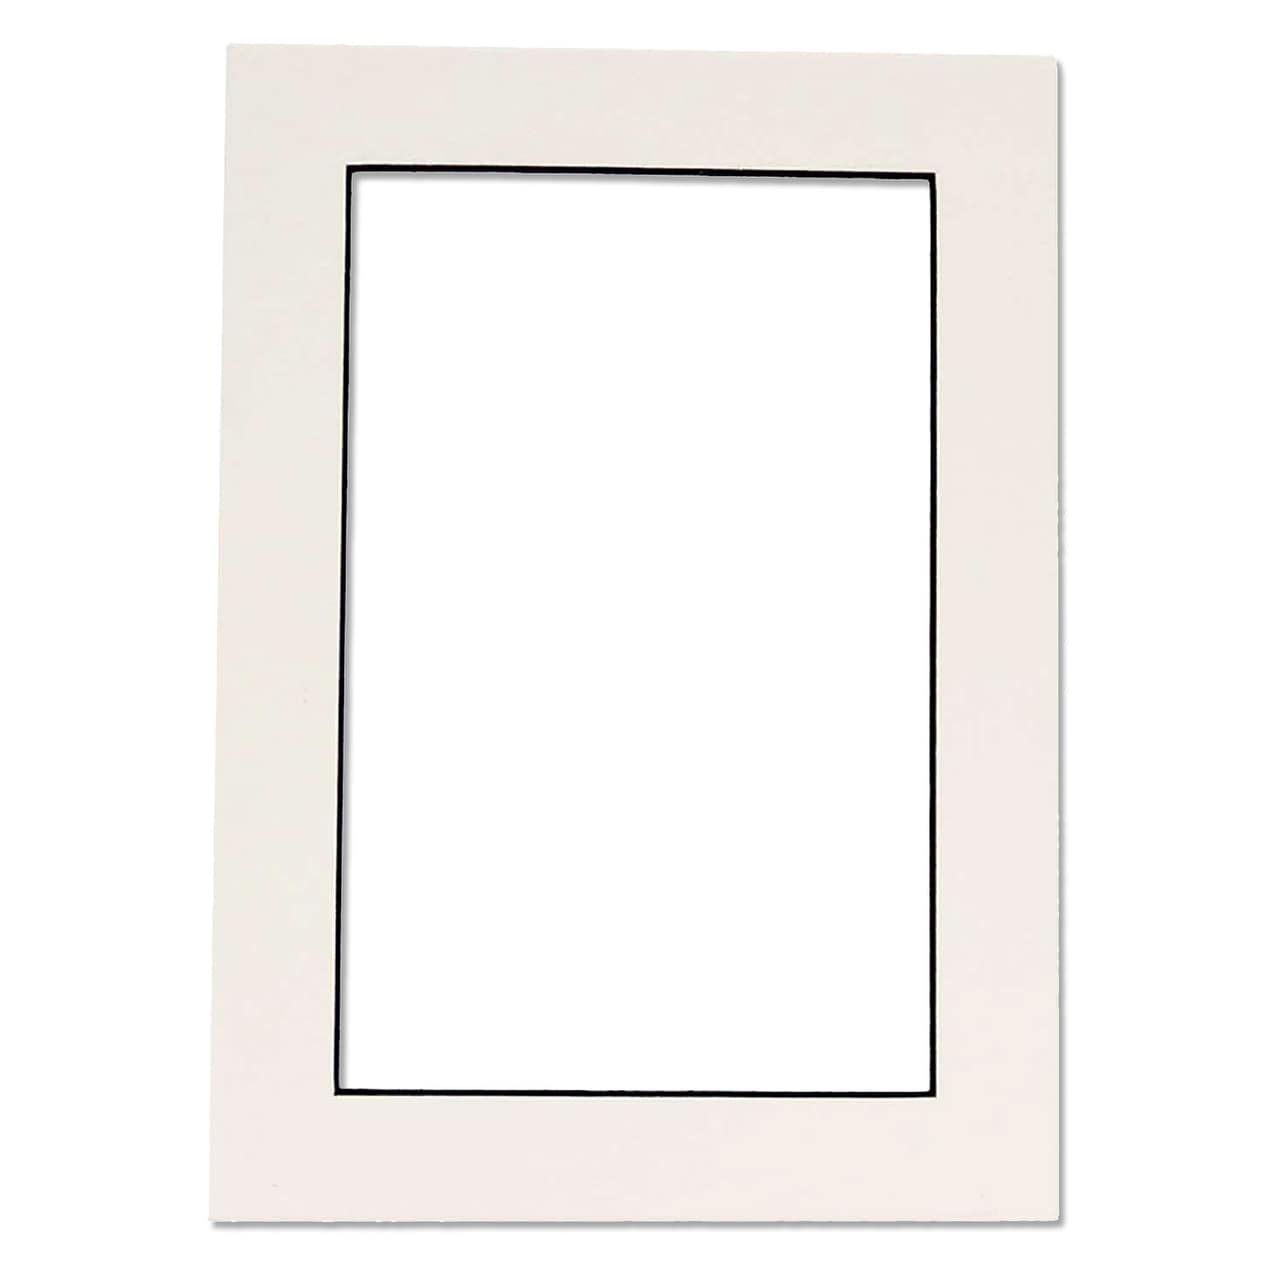 8x10 Mat for 6x8 Photo - White with Black Core Matboard for Frames  Measuring 8 x 10 In- To Display Art Measuring 6 x 8 Inches - Bed Bath &  Beyond - 38871282